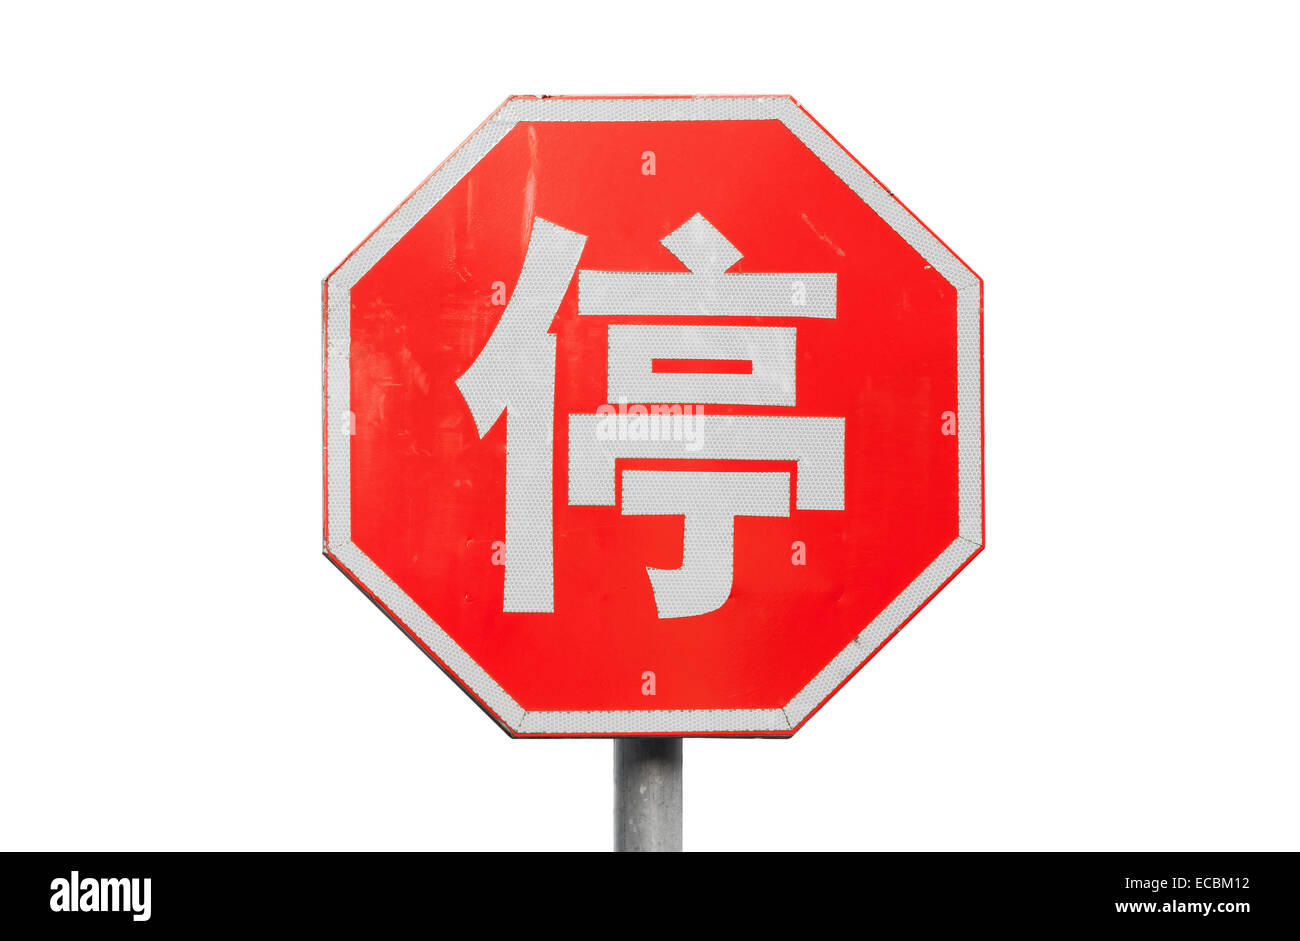 Red stop road sign with Chinese character isolated on white background Stock Photo